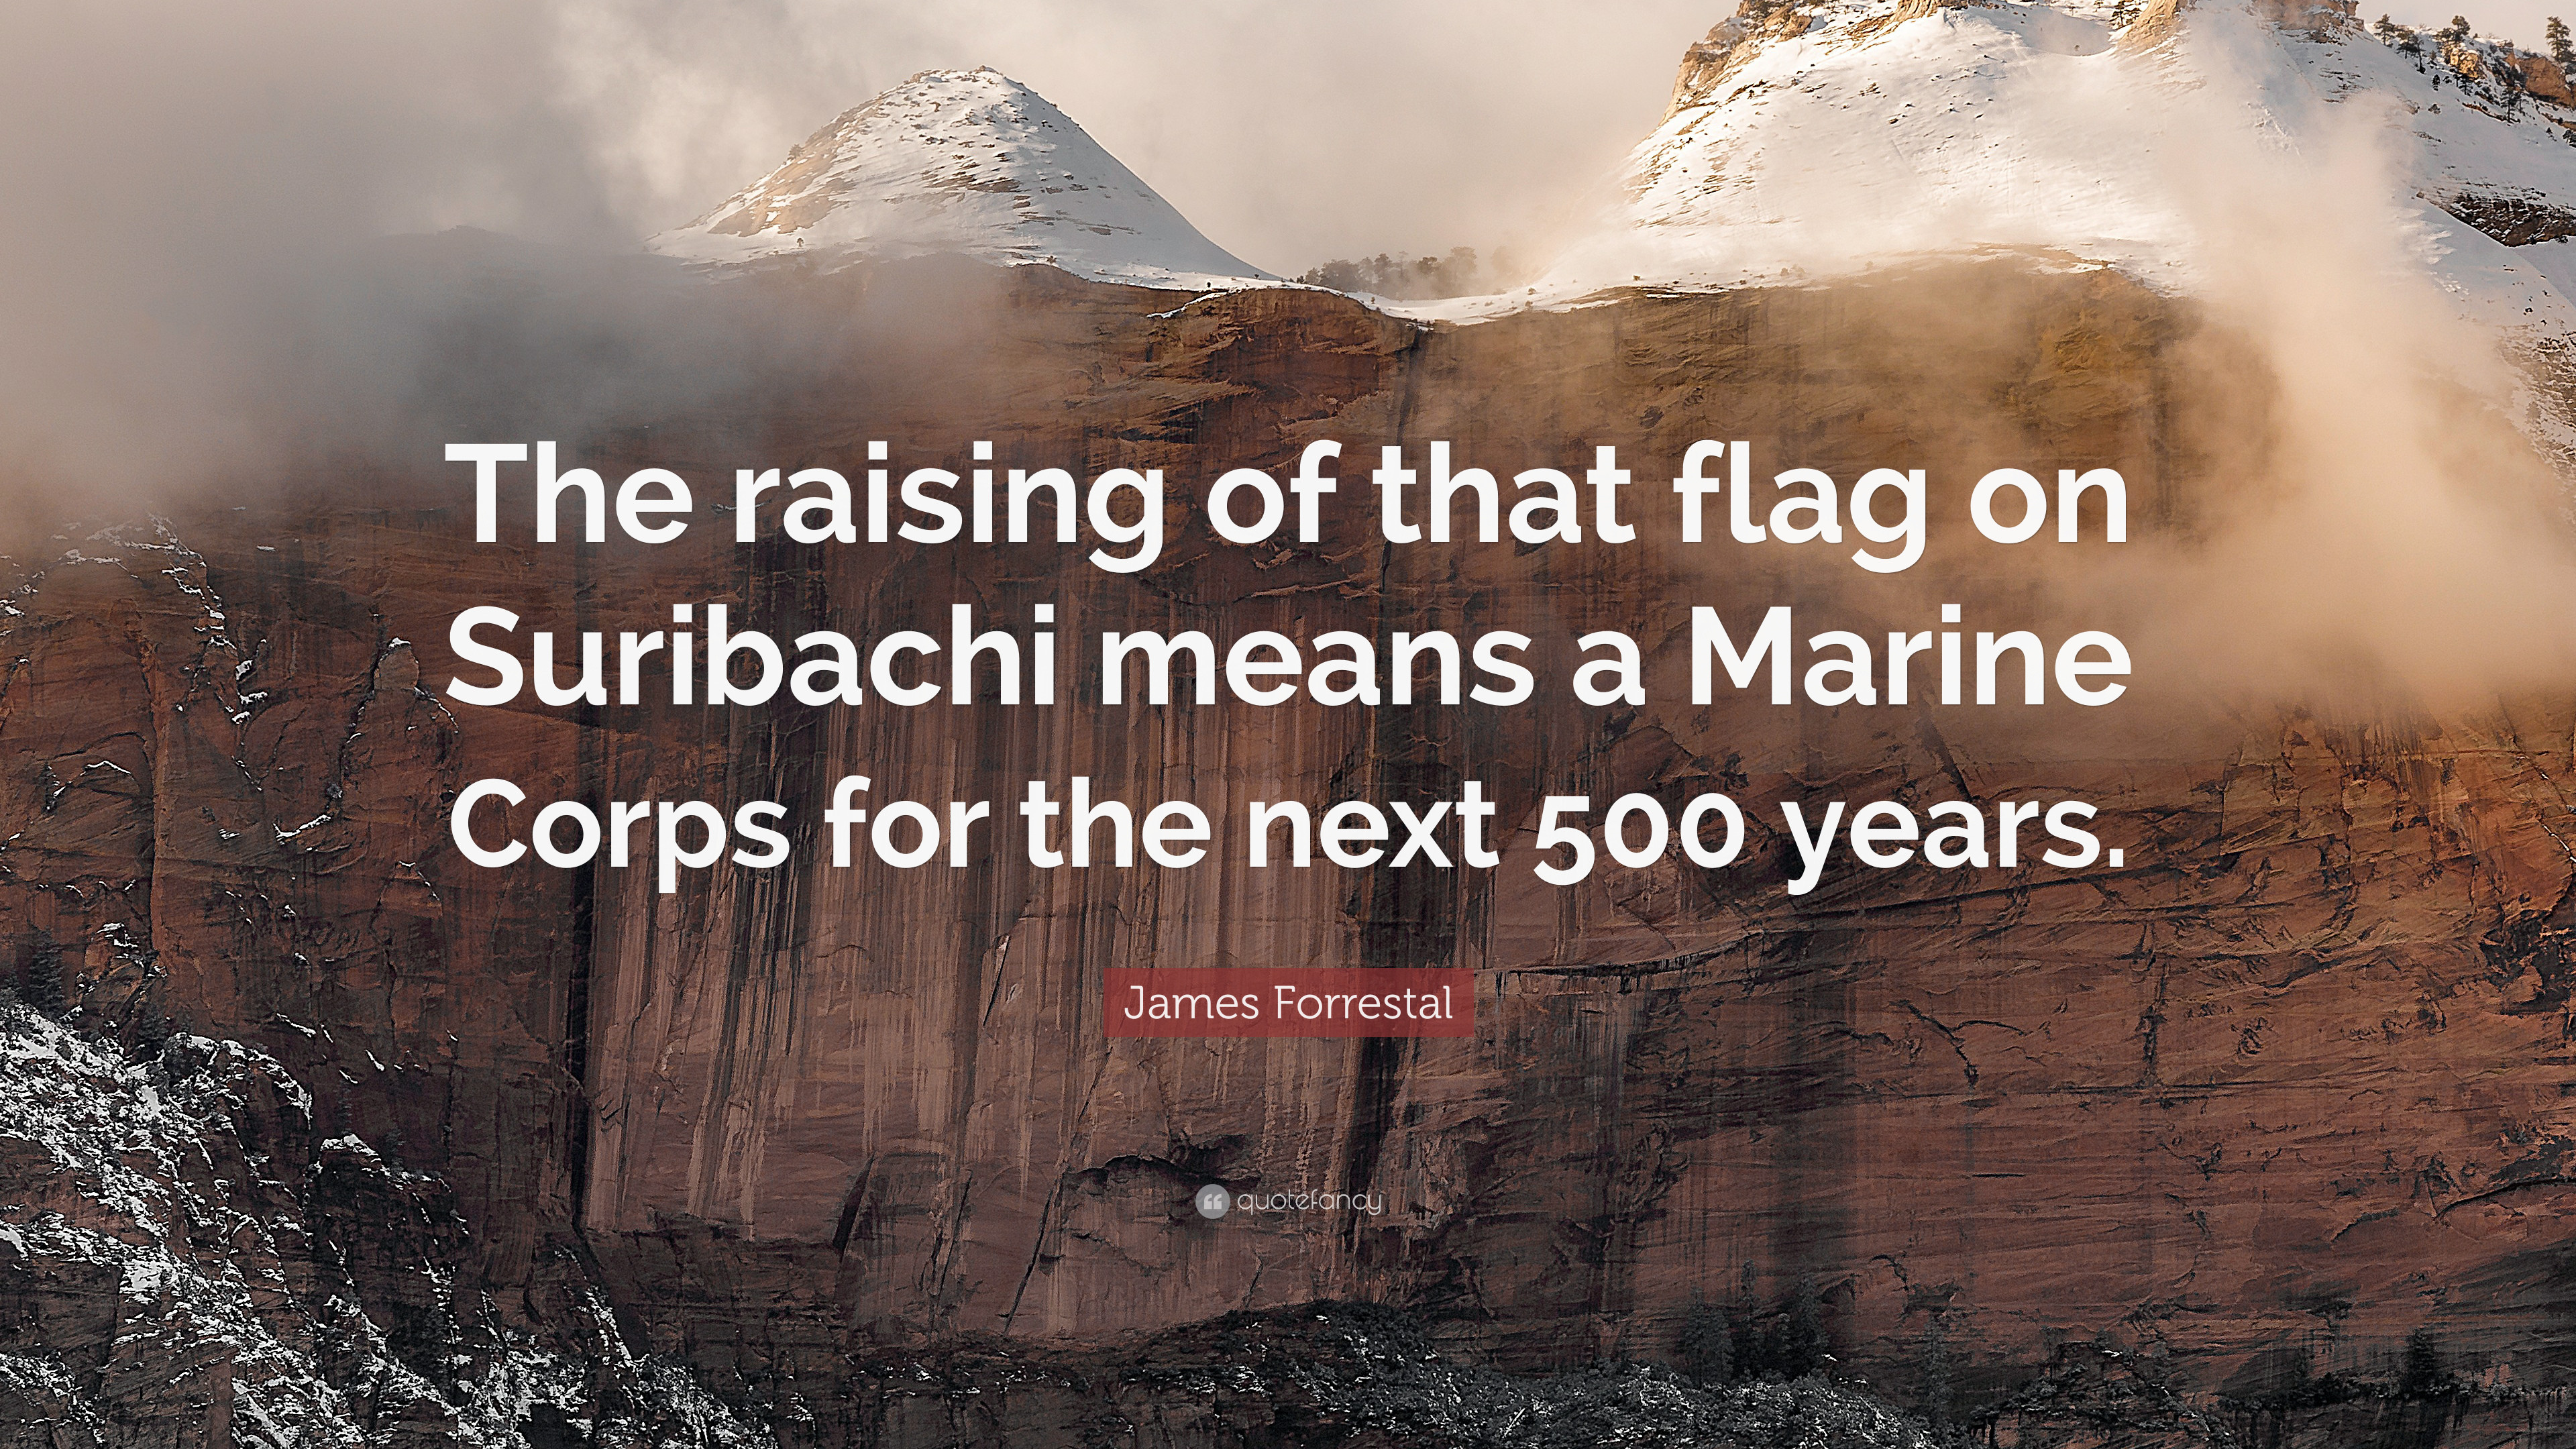 3840x2160 James Forrestal Quote: “The raising of that flag on Suribachi means a  Marine Corps